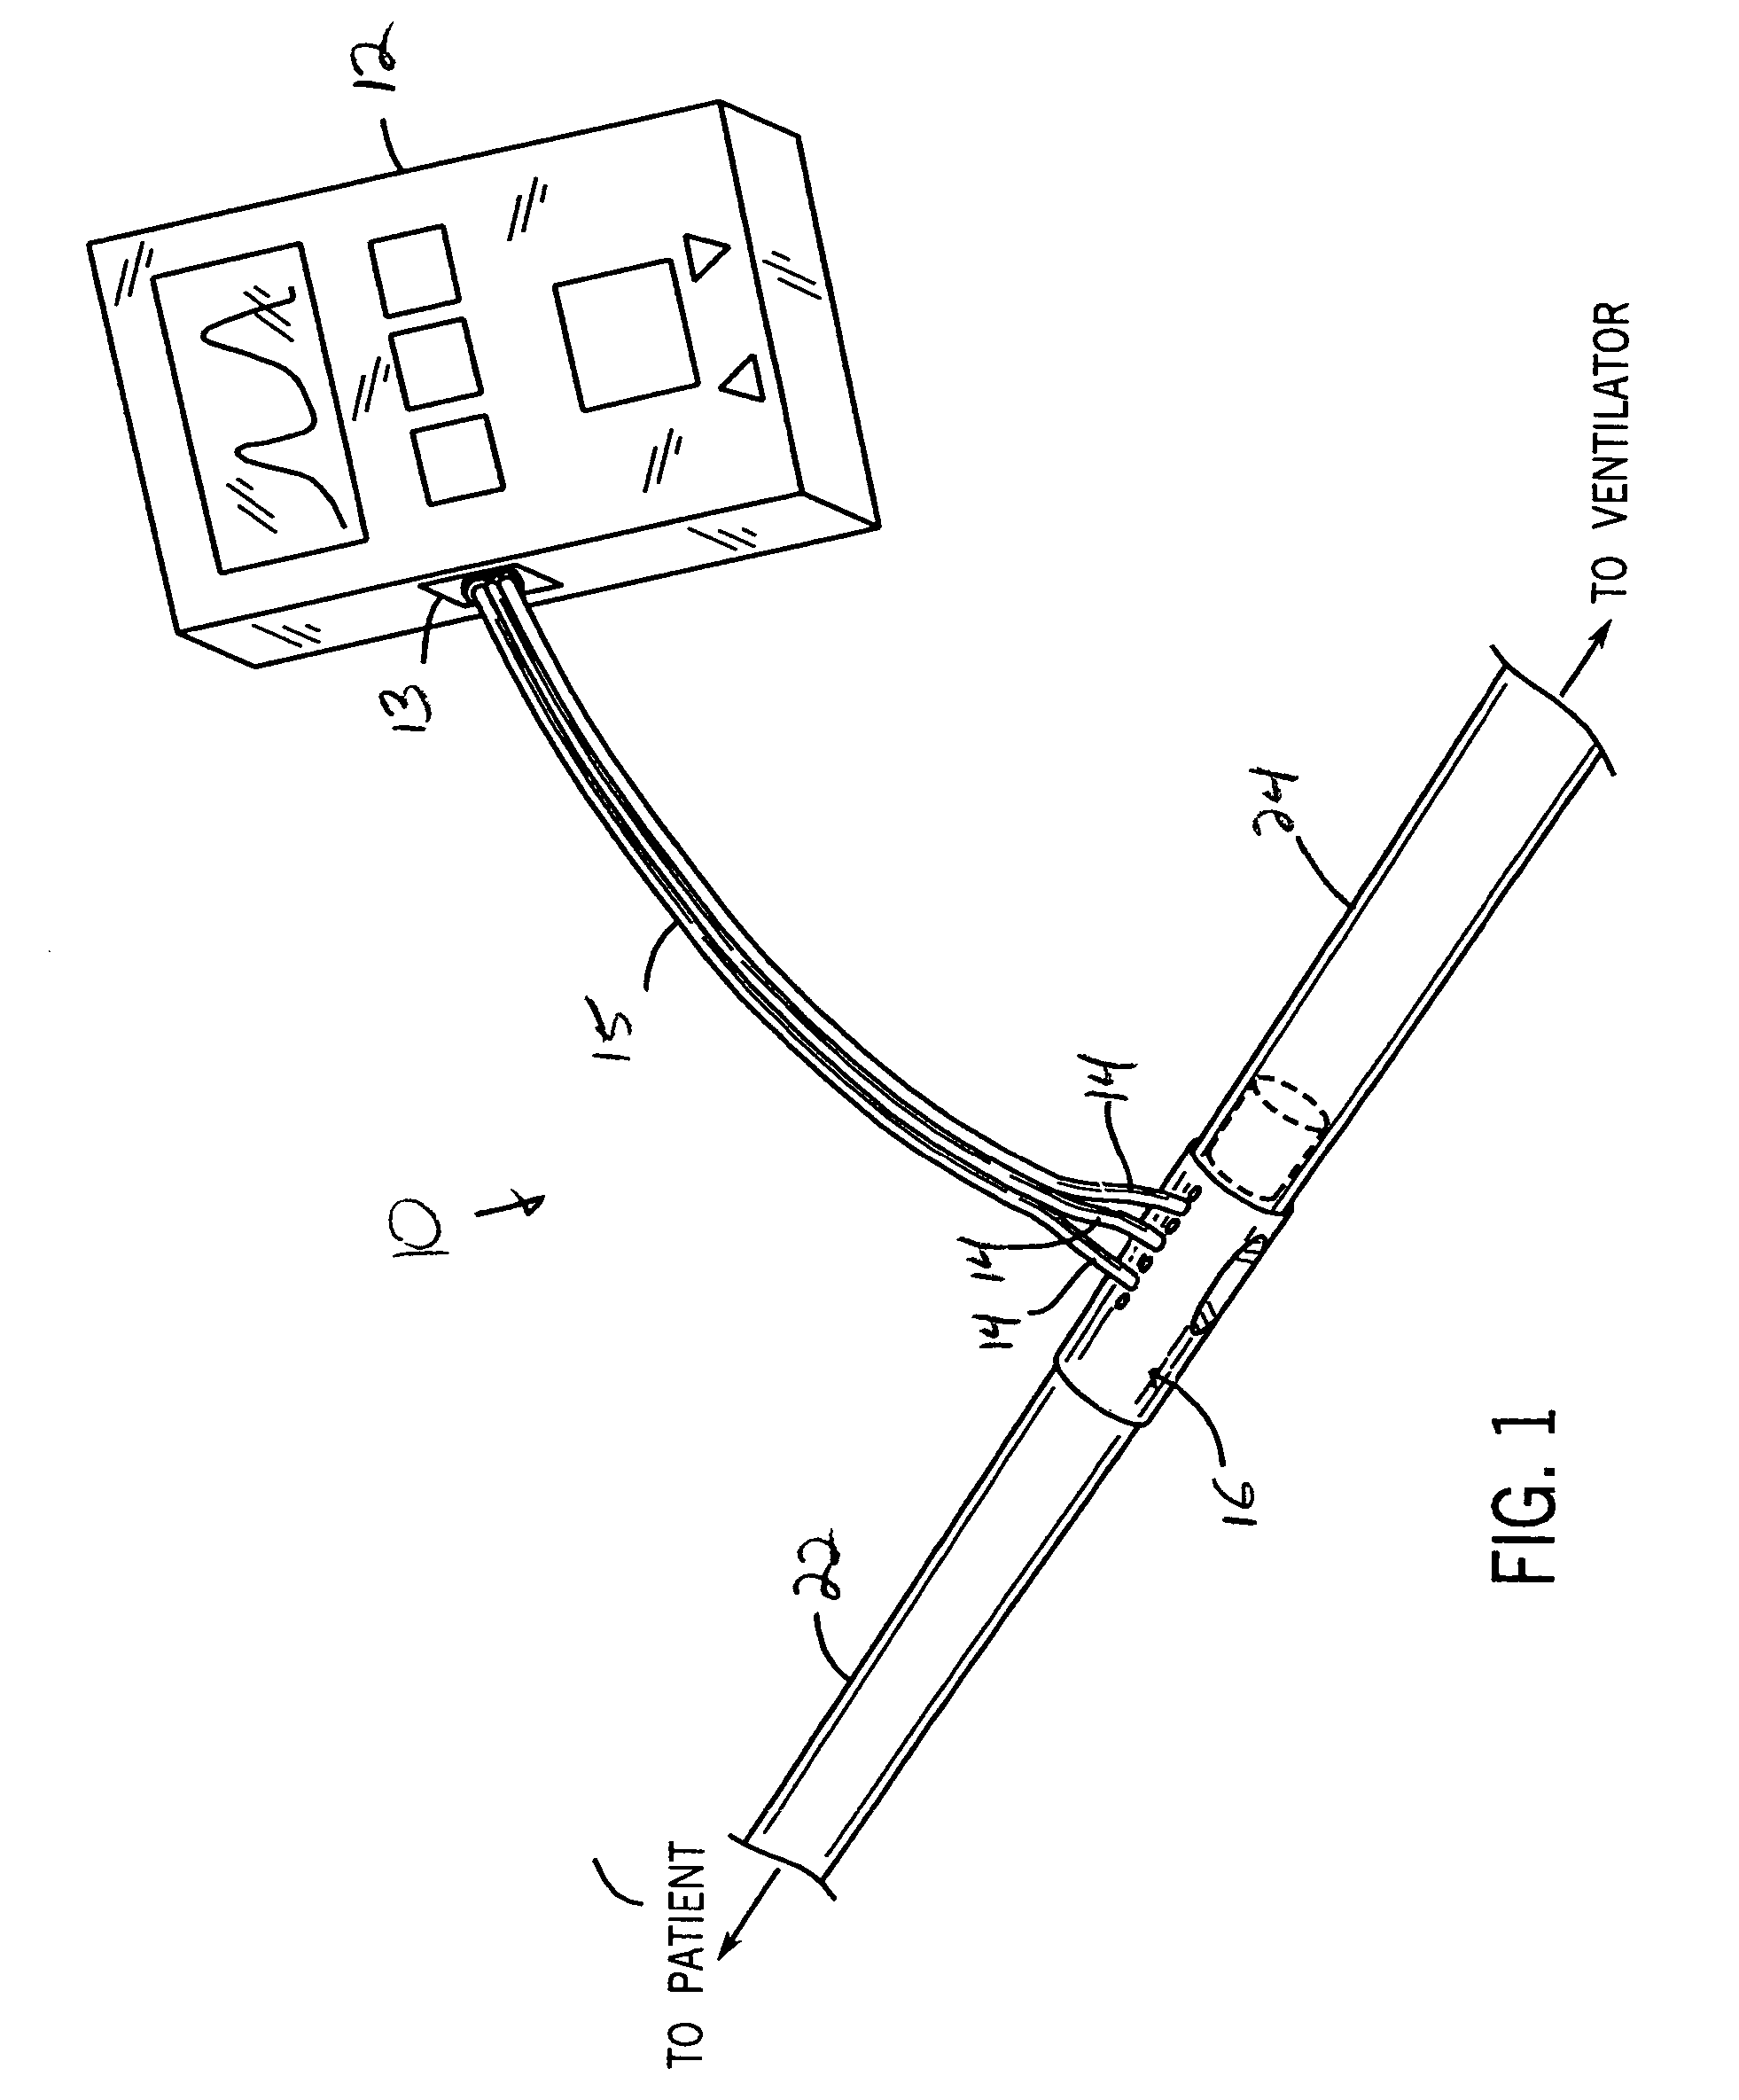 Gas flow diverter for respiratory monitoring device